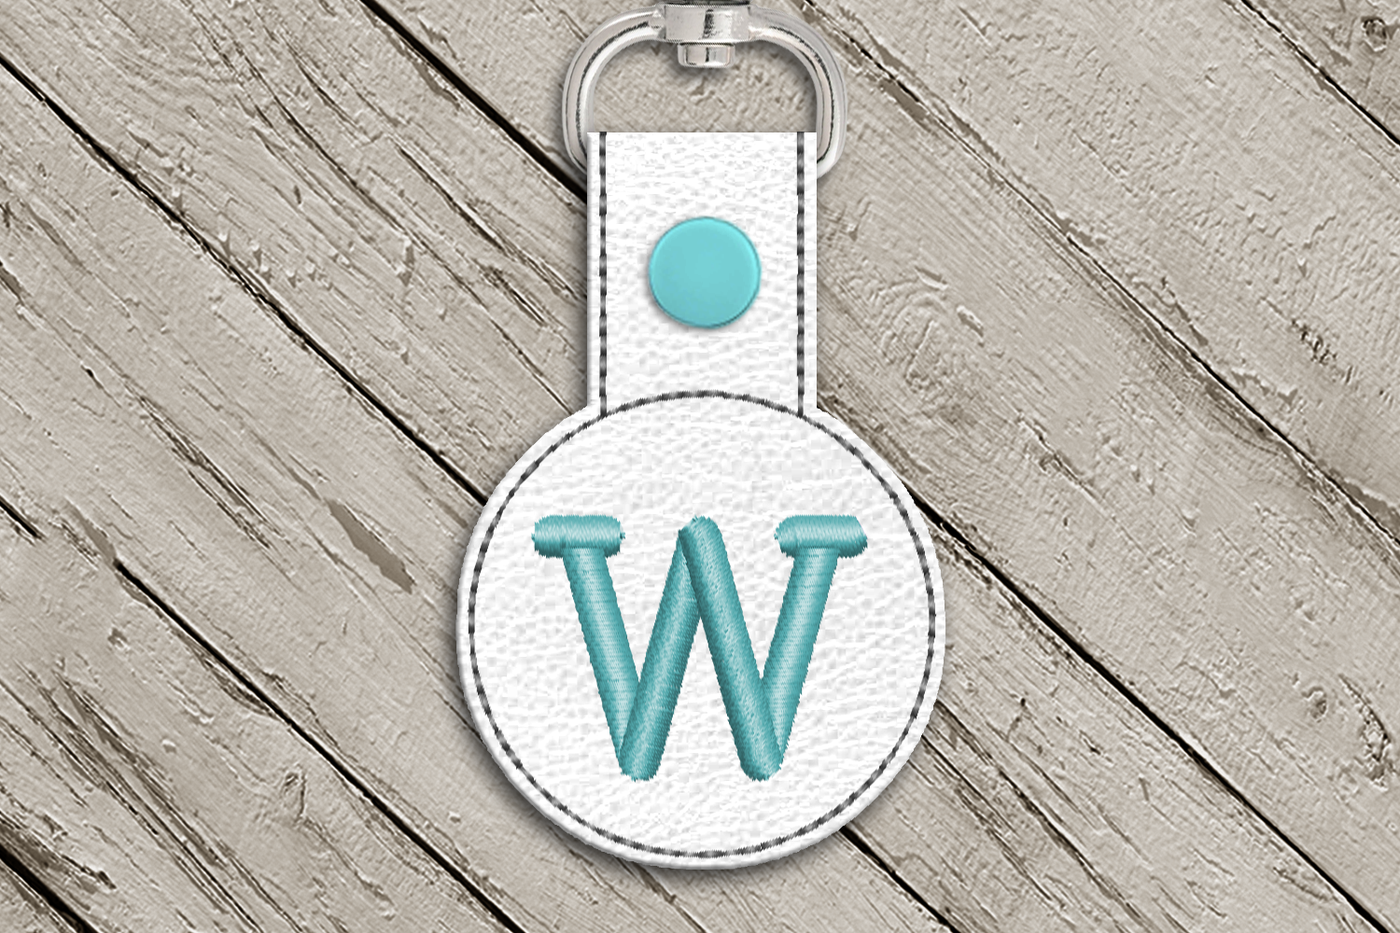 Letter W in the hoop key fob design